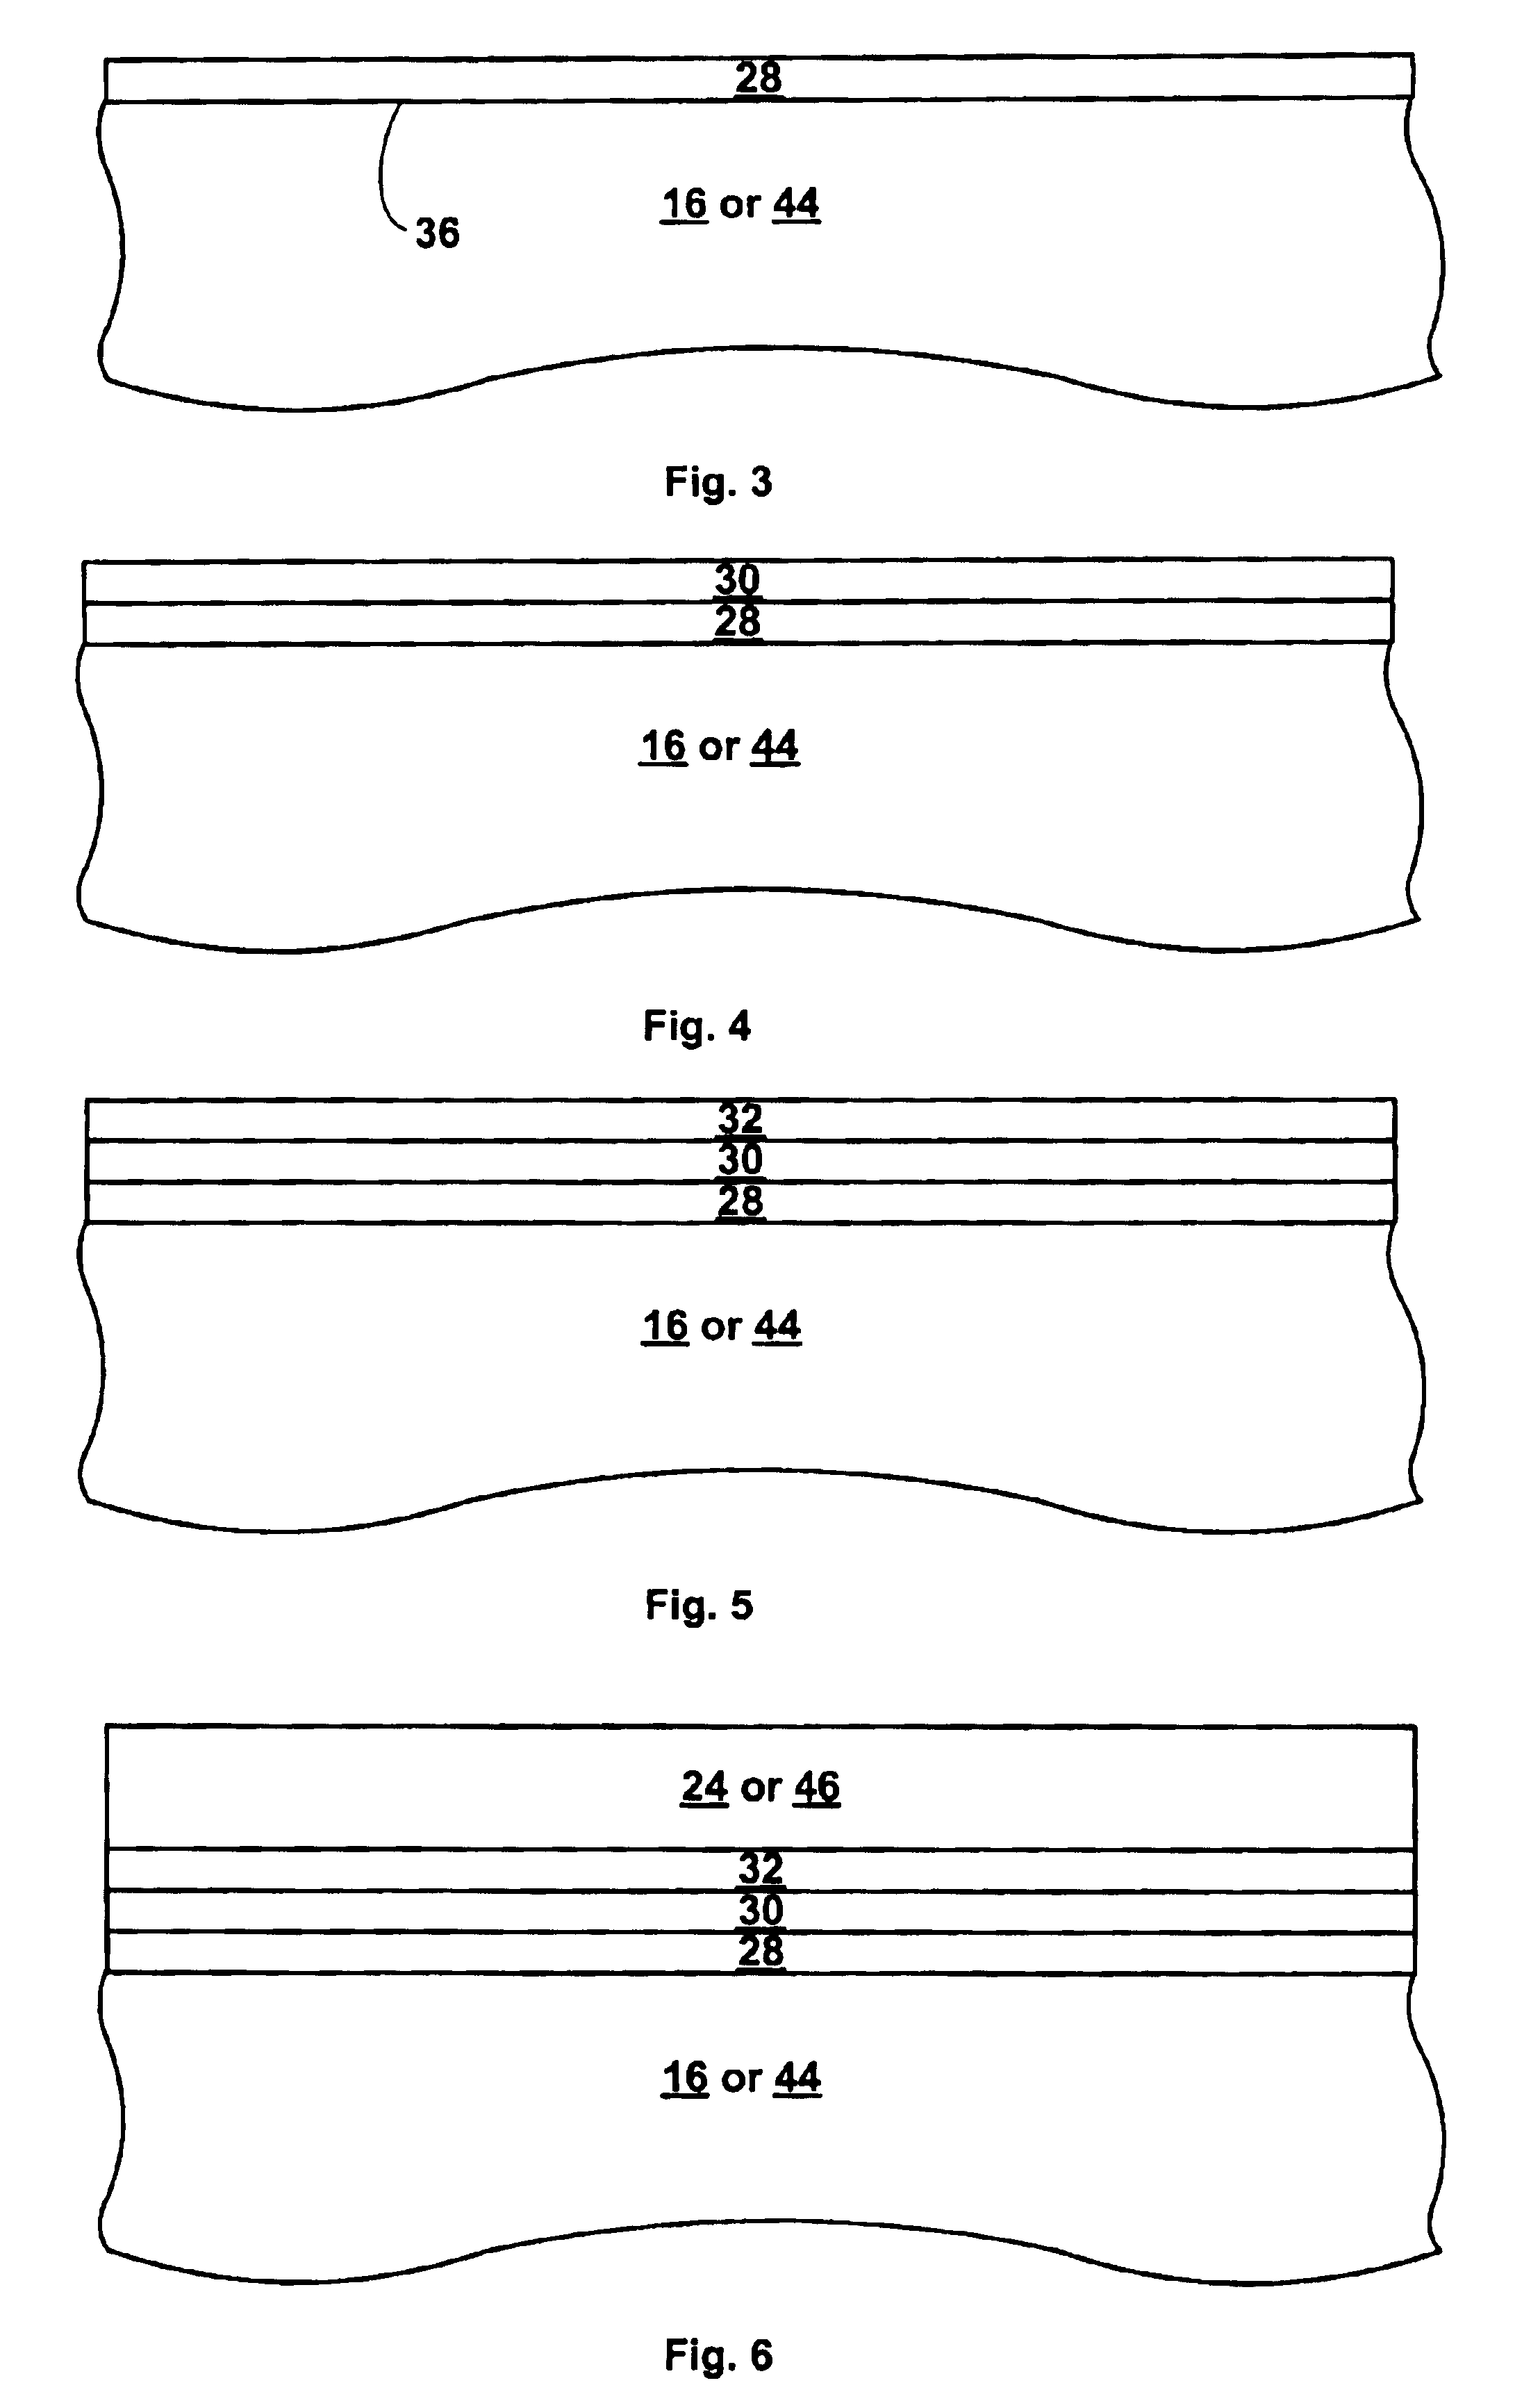 Use of high-K dielectric material in modified ONO structure for semiconductor devices